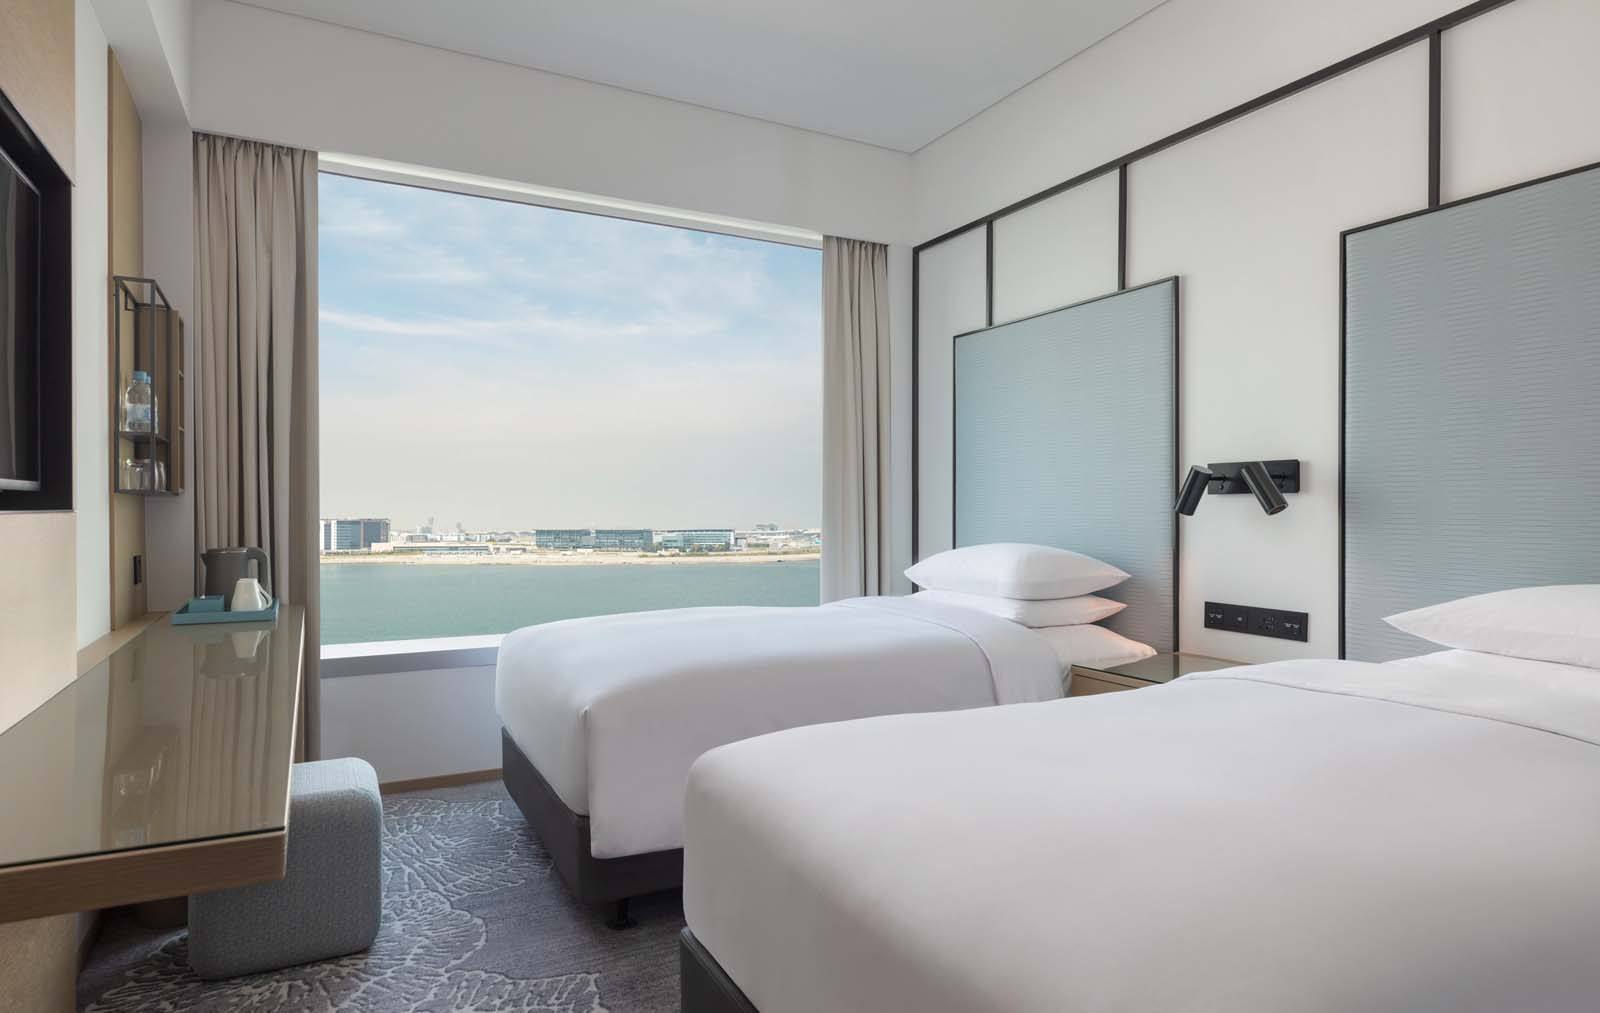 Interior of a traditional oceanview twin bedroom at Four Points by Sheraton hotel in Hong Kong